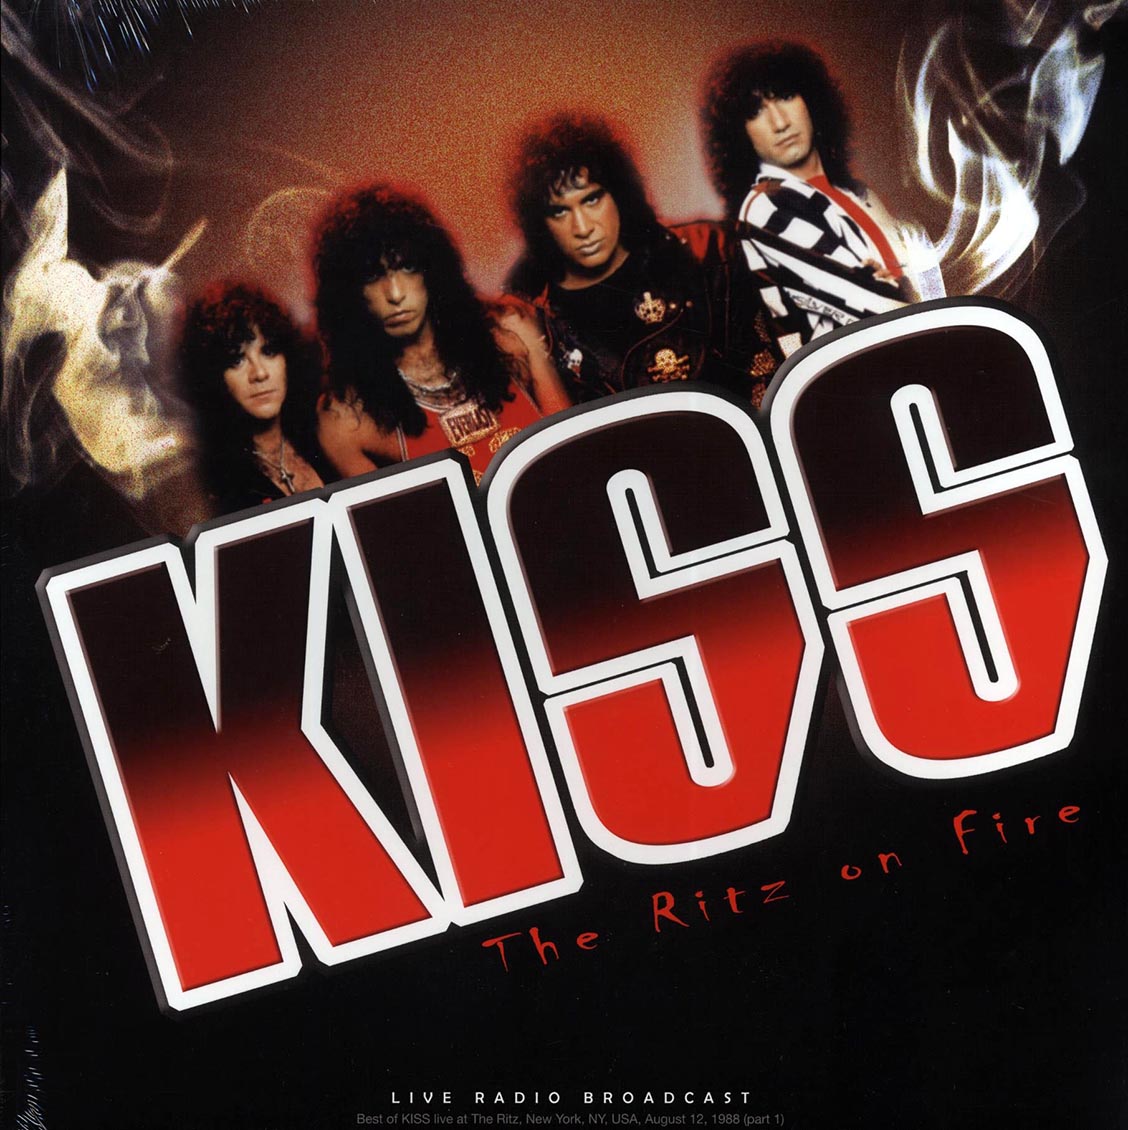 Kiss - The Ritz On Fire Part 1: Live At The Ritz, New York, August 12, 1986 - Vinyl LP